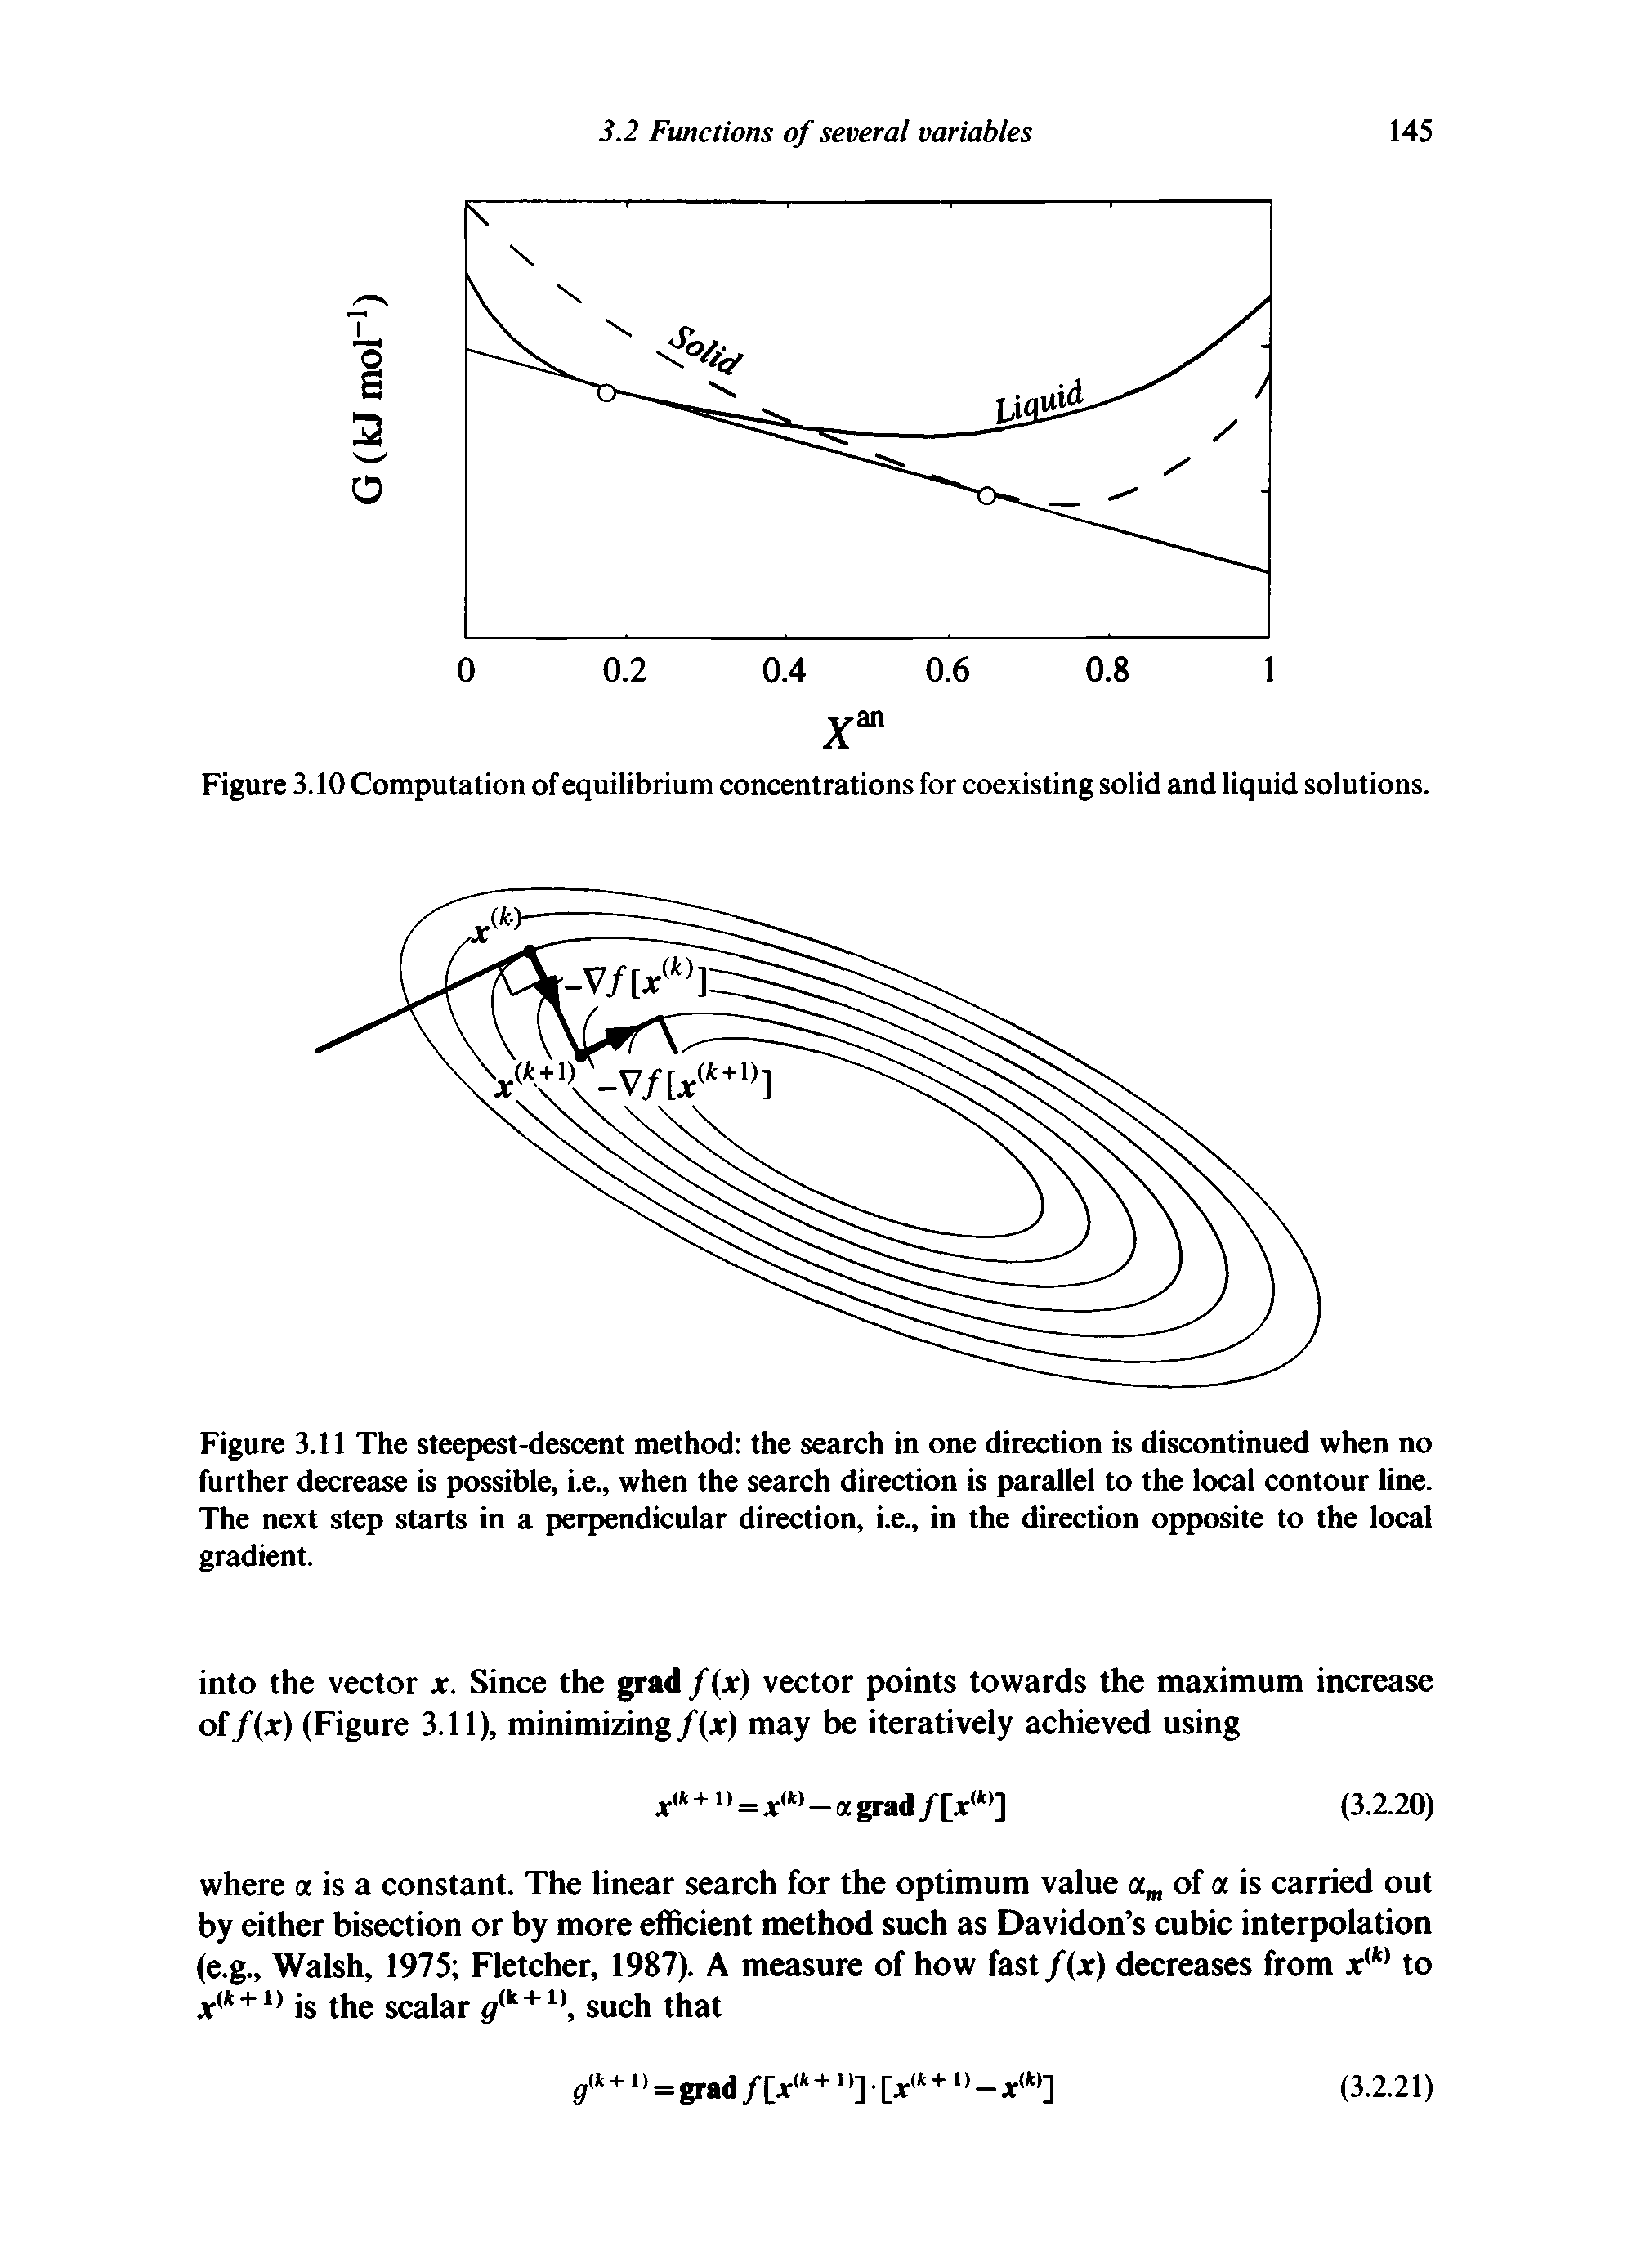 Figure 3.11 The steepest-descent method the search in one direction is discontinued when no further decrease is possible, i.e., when the search direction is parallel to the local contour line. The next step starts in a perpendicular direction, i.e., in the direction opposite to the local gradient.